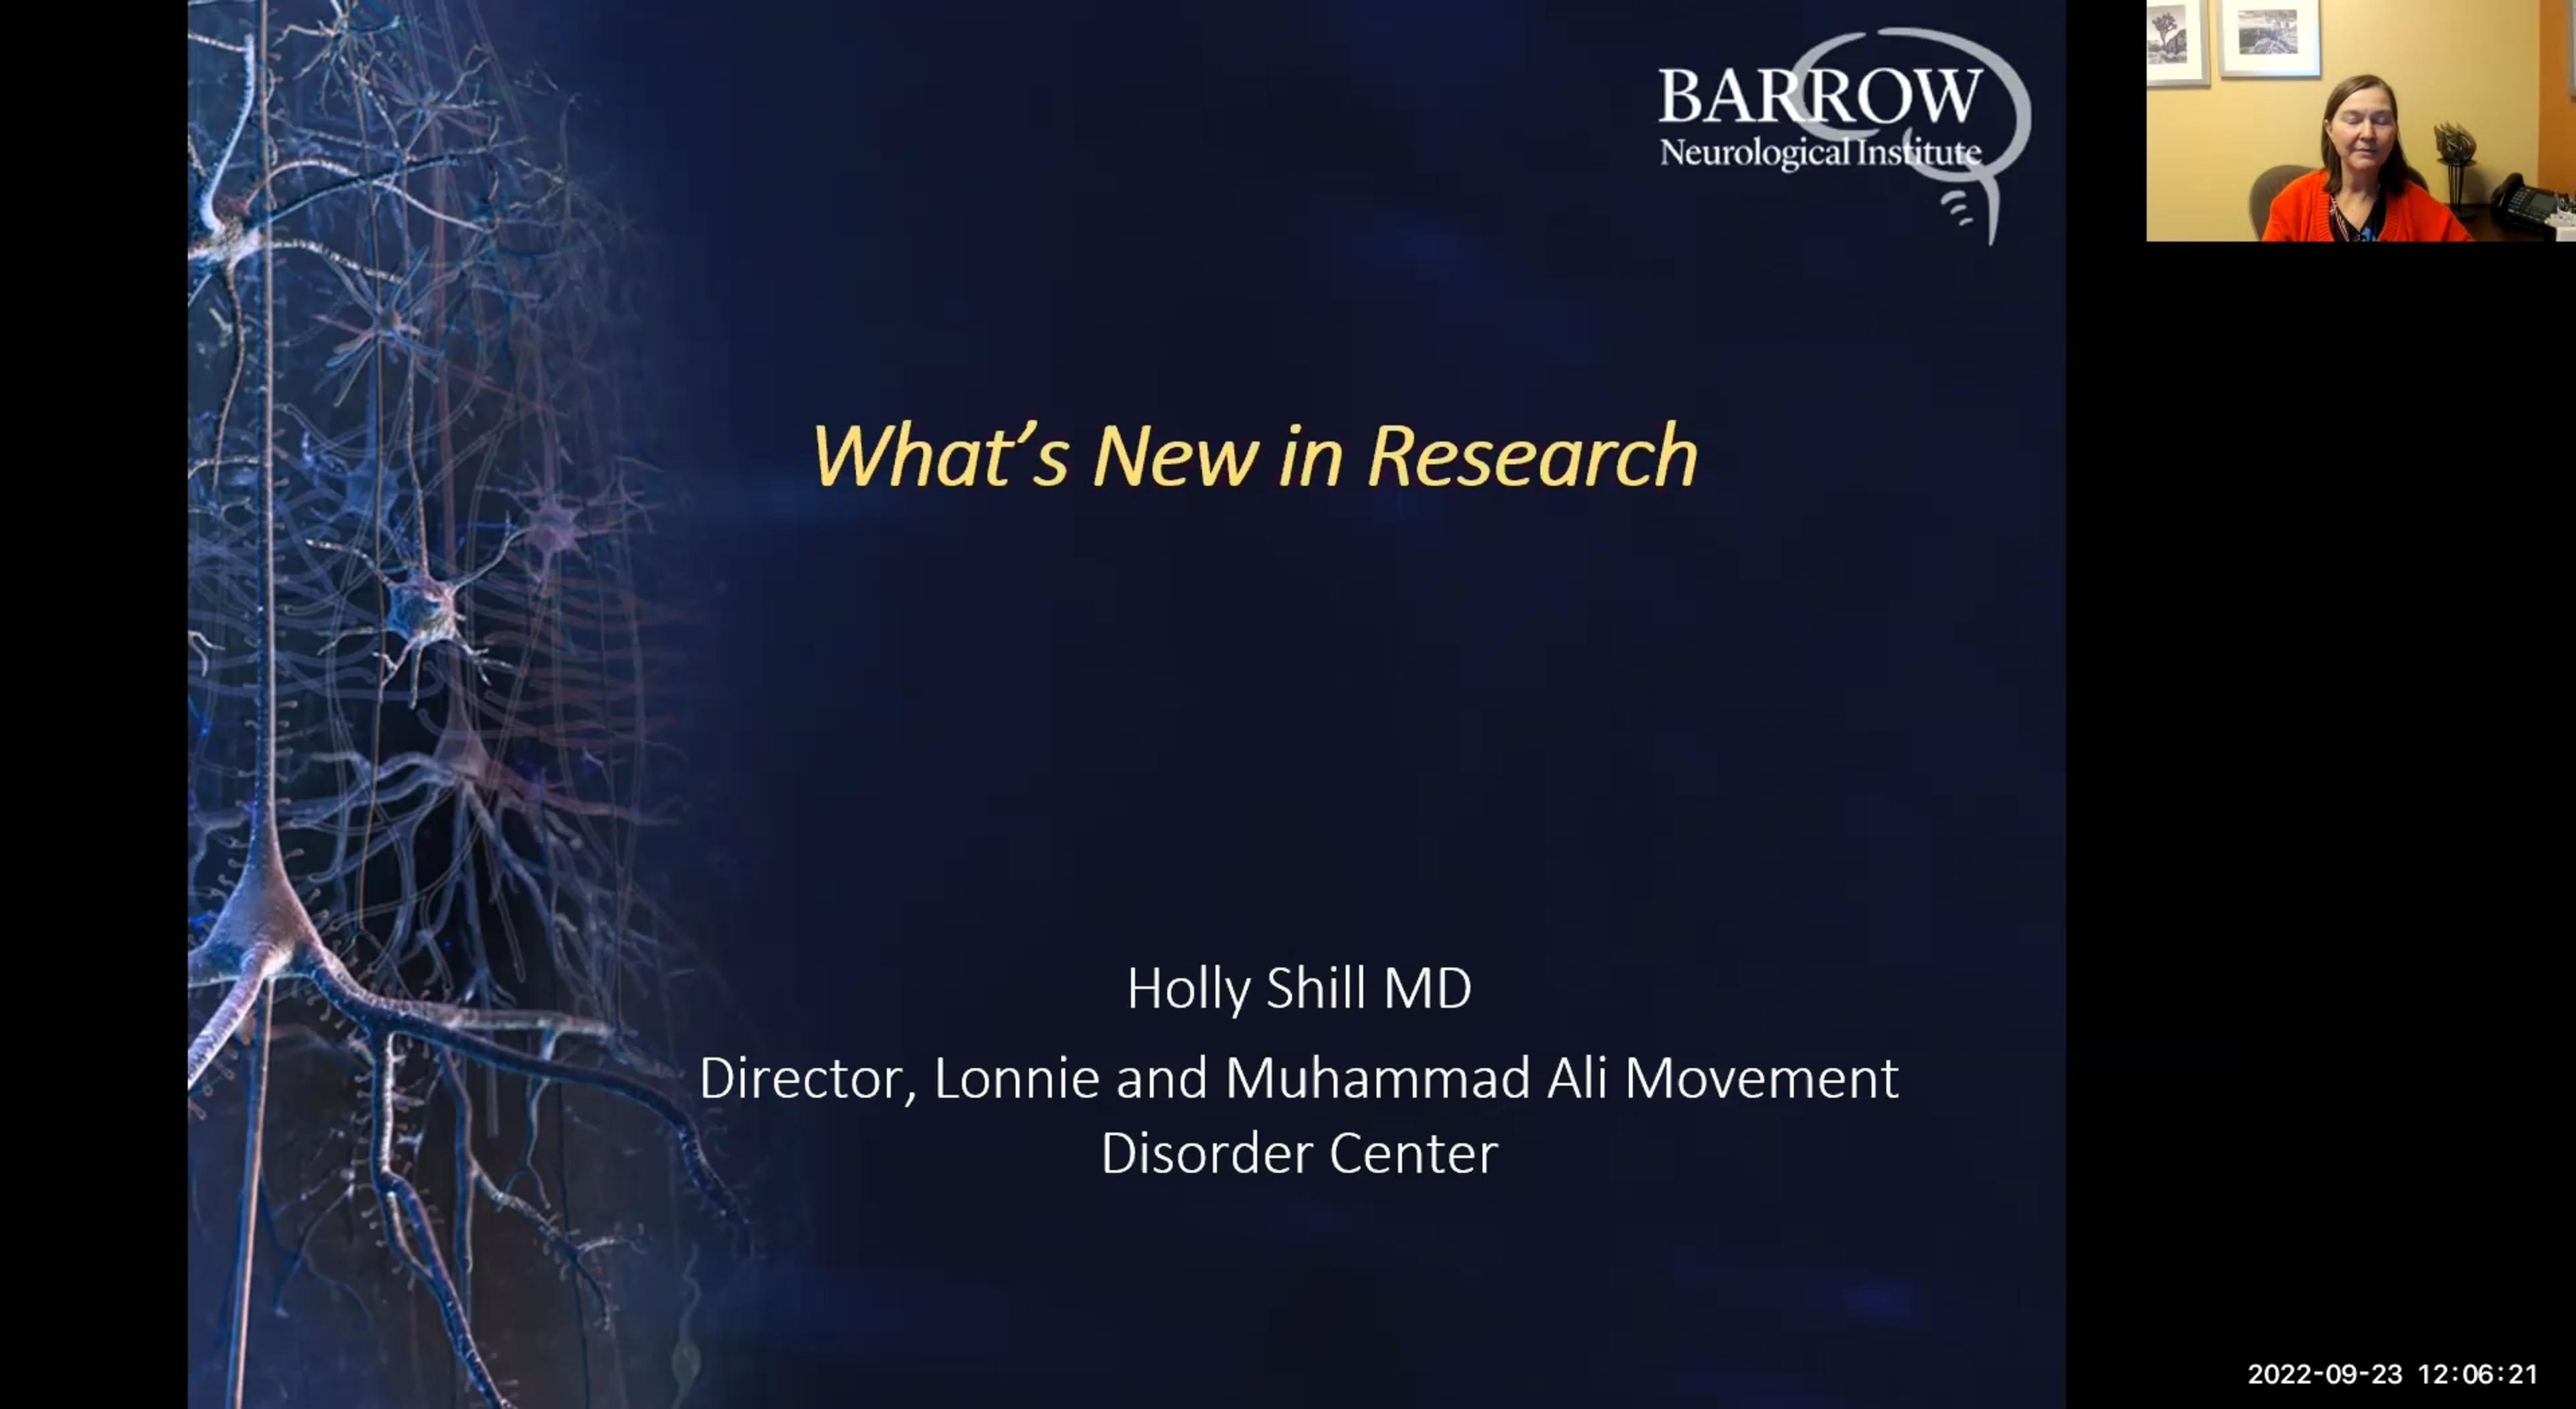 What's New in Parkinson's Disease Research